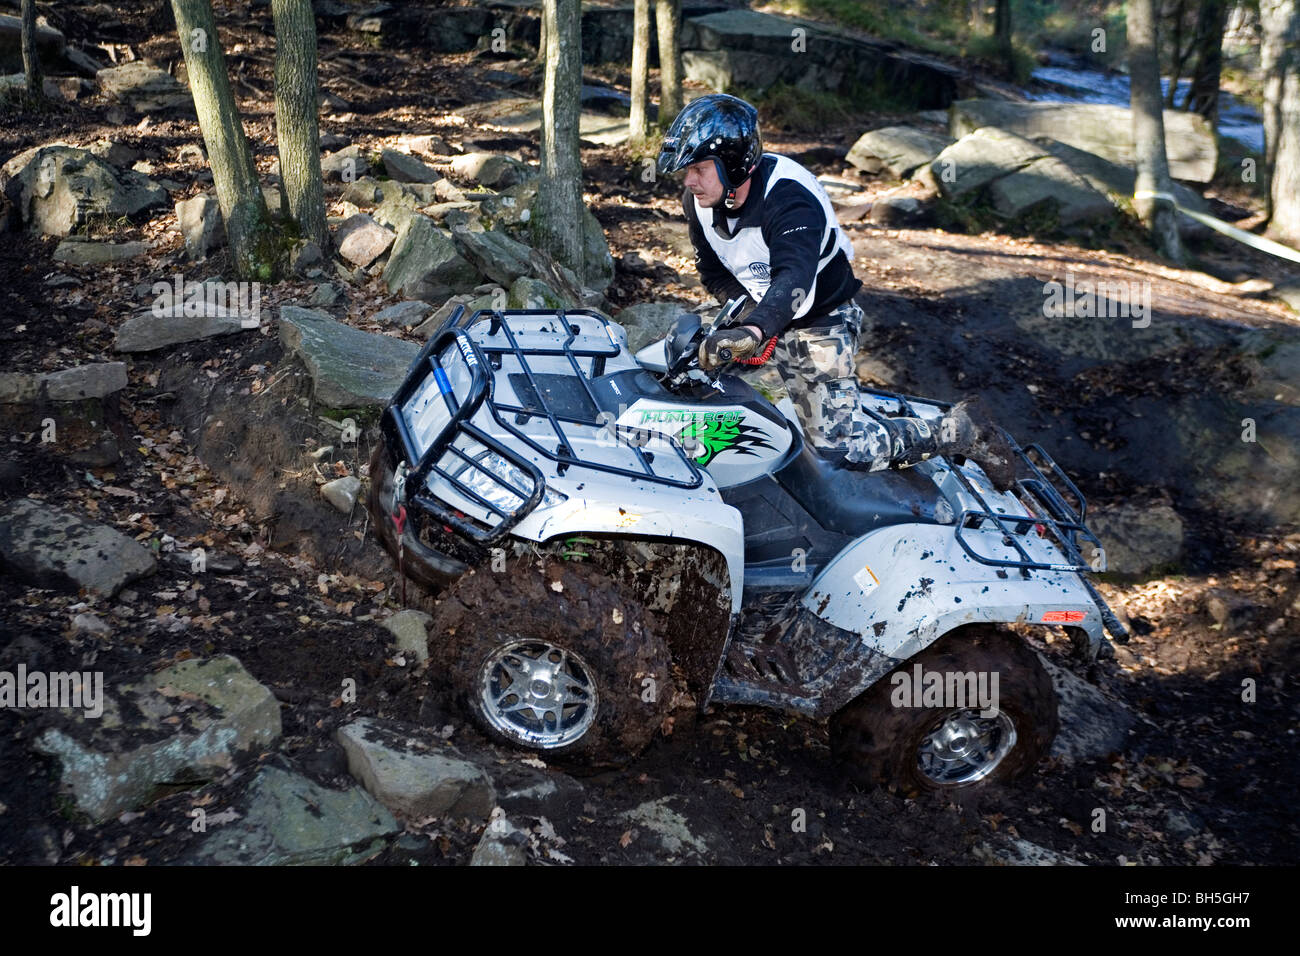 A young man in protective wear rides all terrain vehicle off road during 4 wheel trial competition. Stock Photo